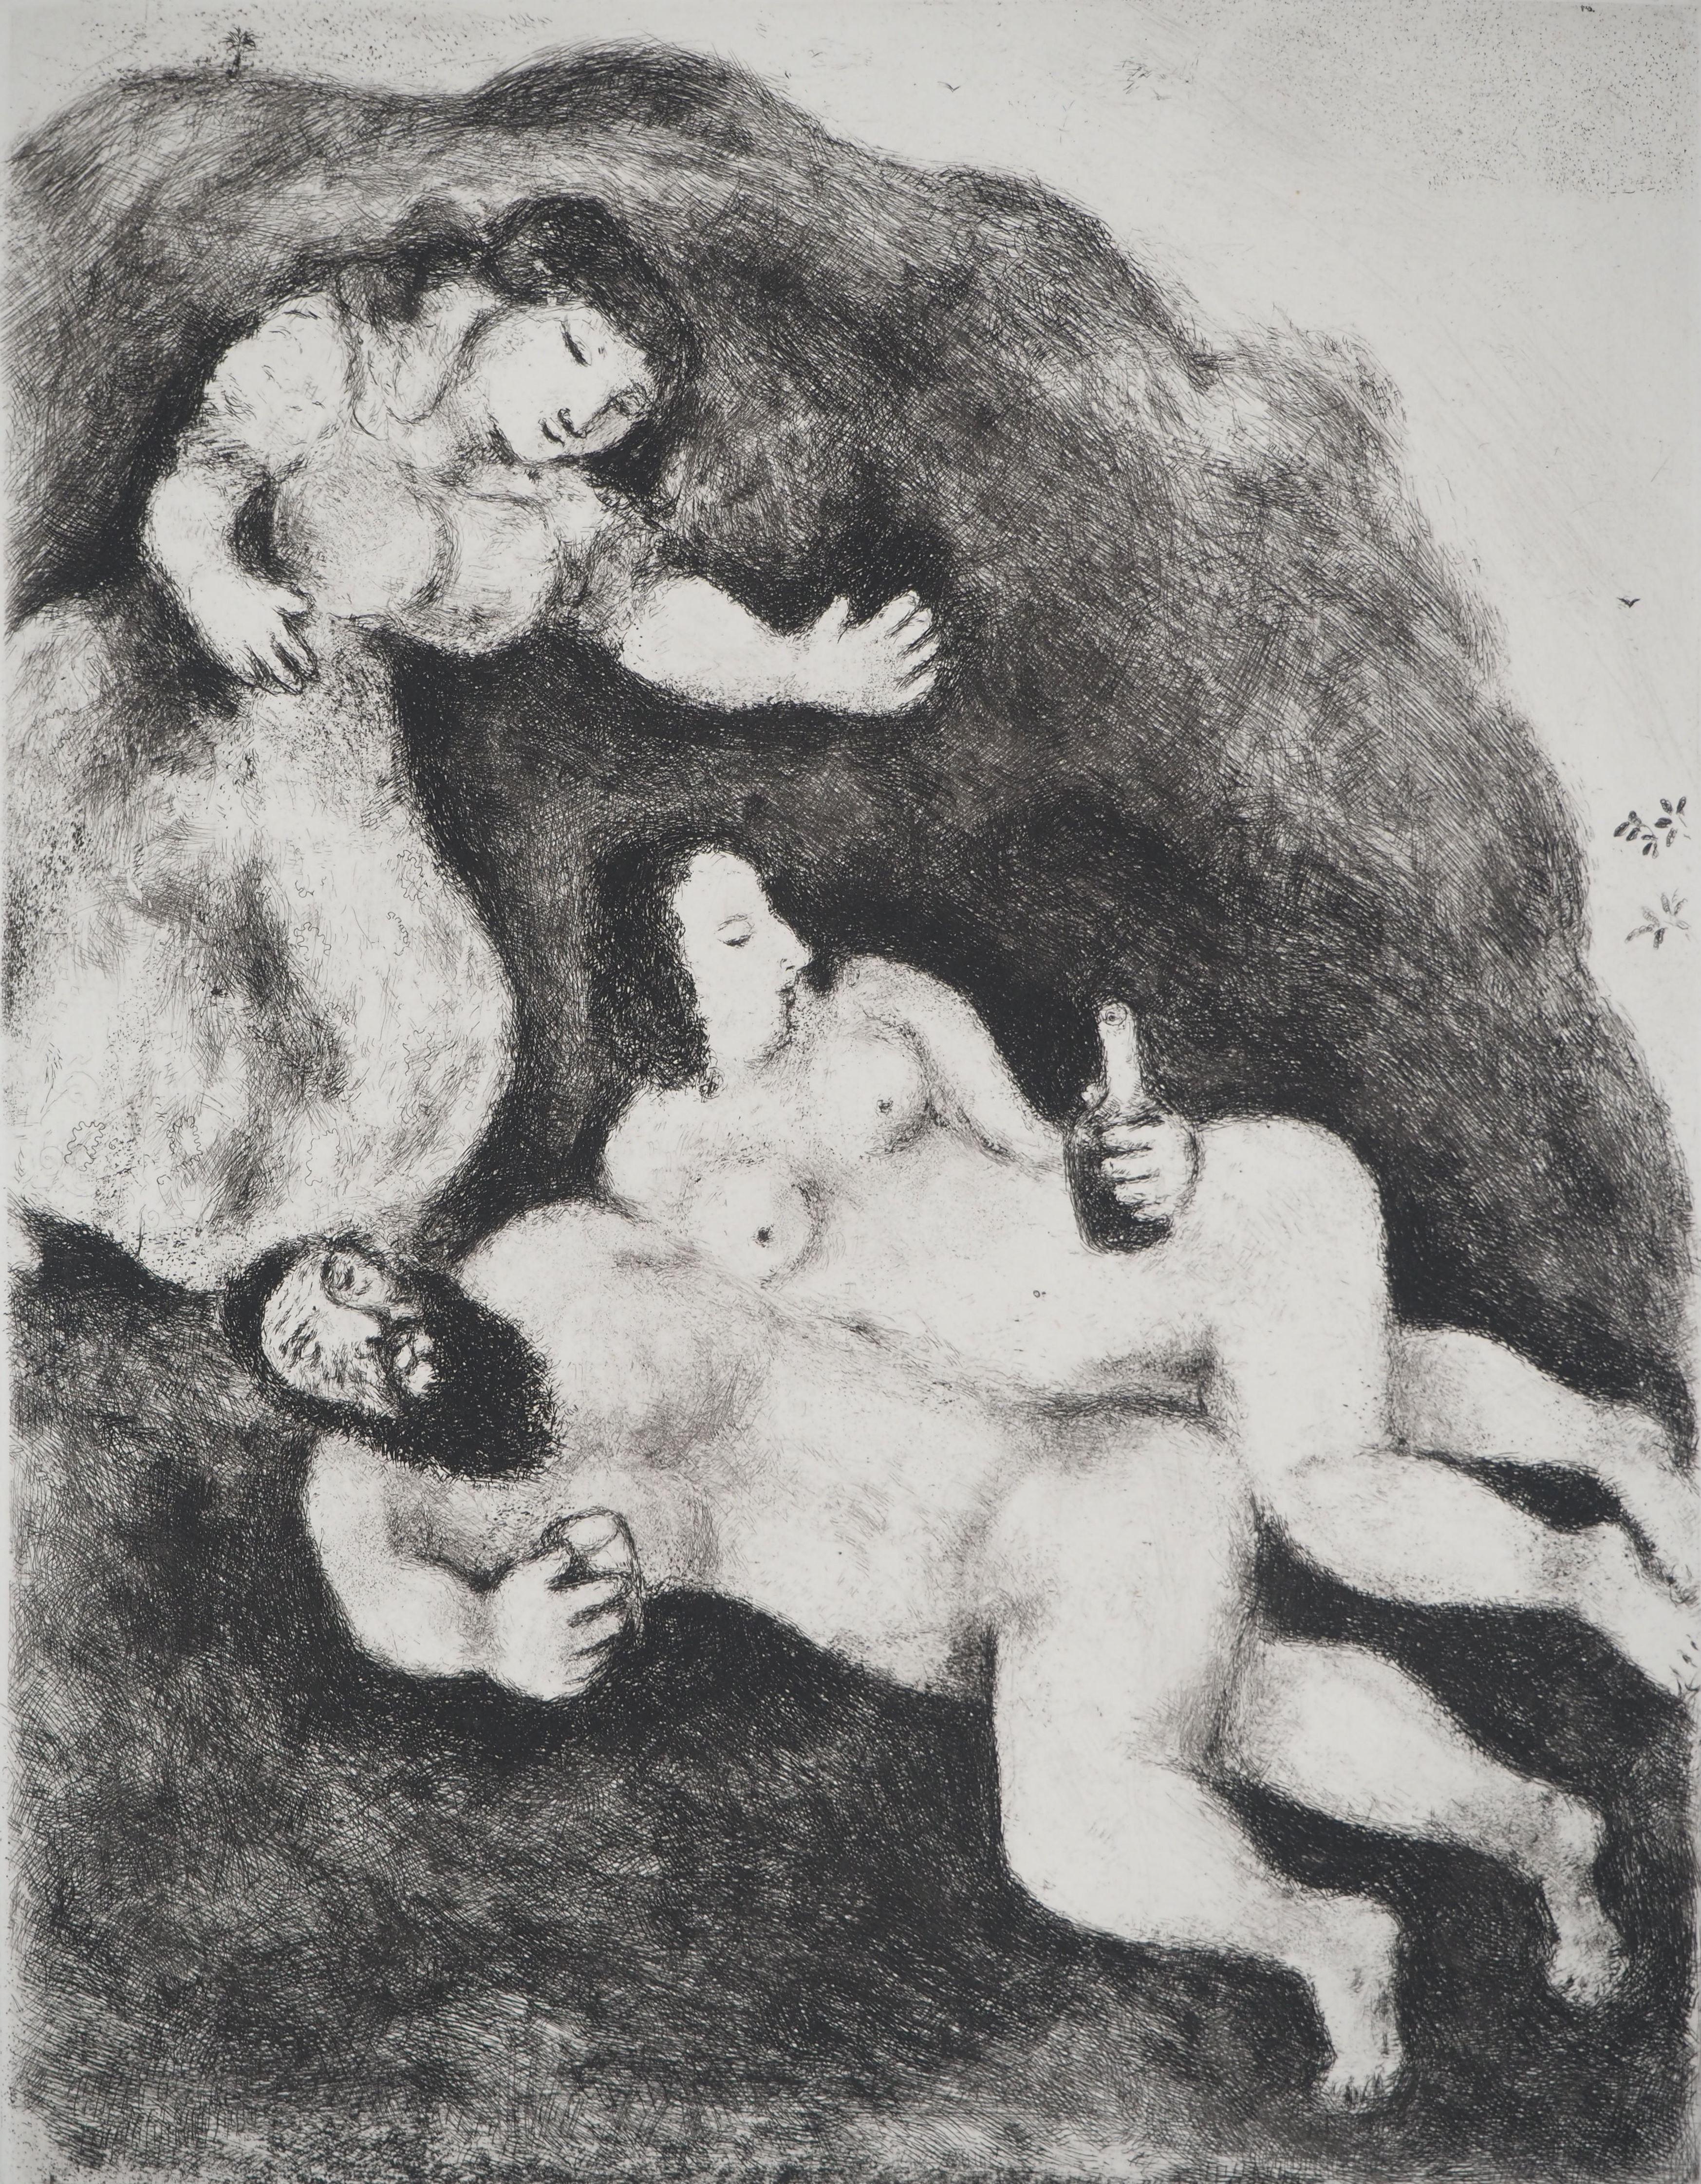 Bible : Lot and his daughters, 1939 - Original Etching - Print by Marc Chagall